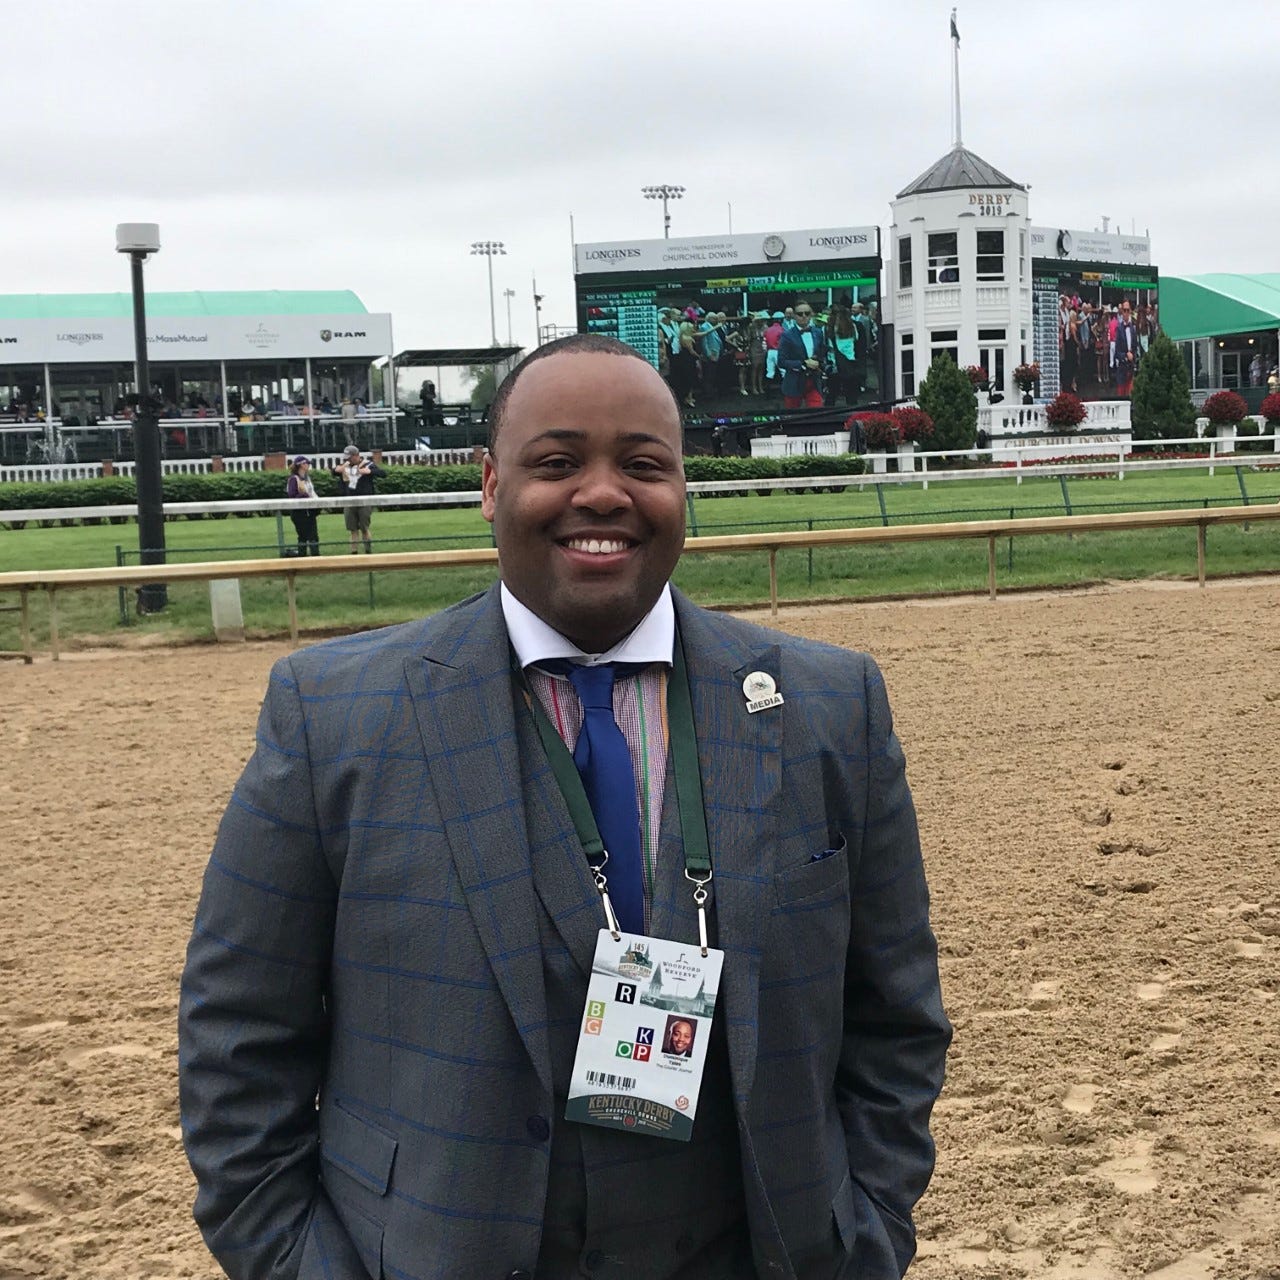 Attending my first Kentucky Derby on May 4, 2019.